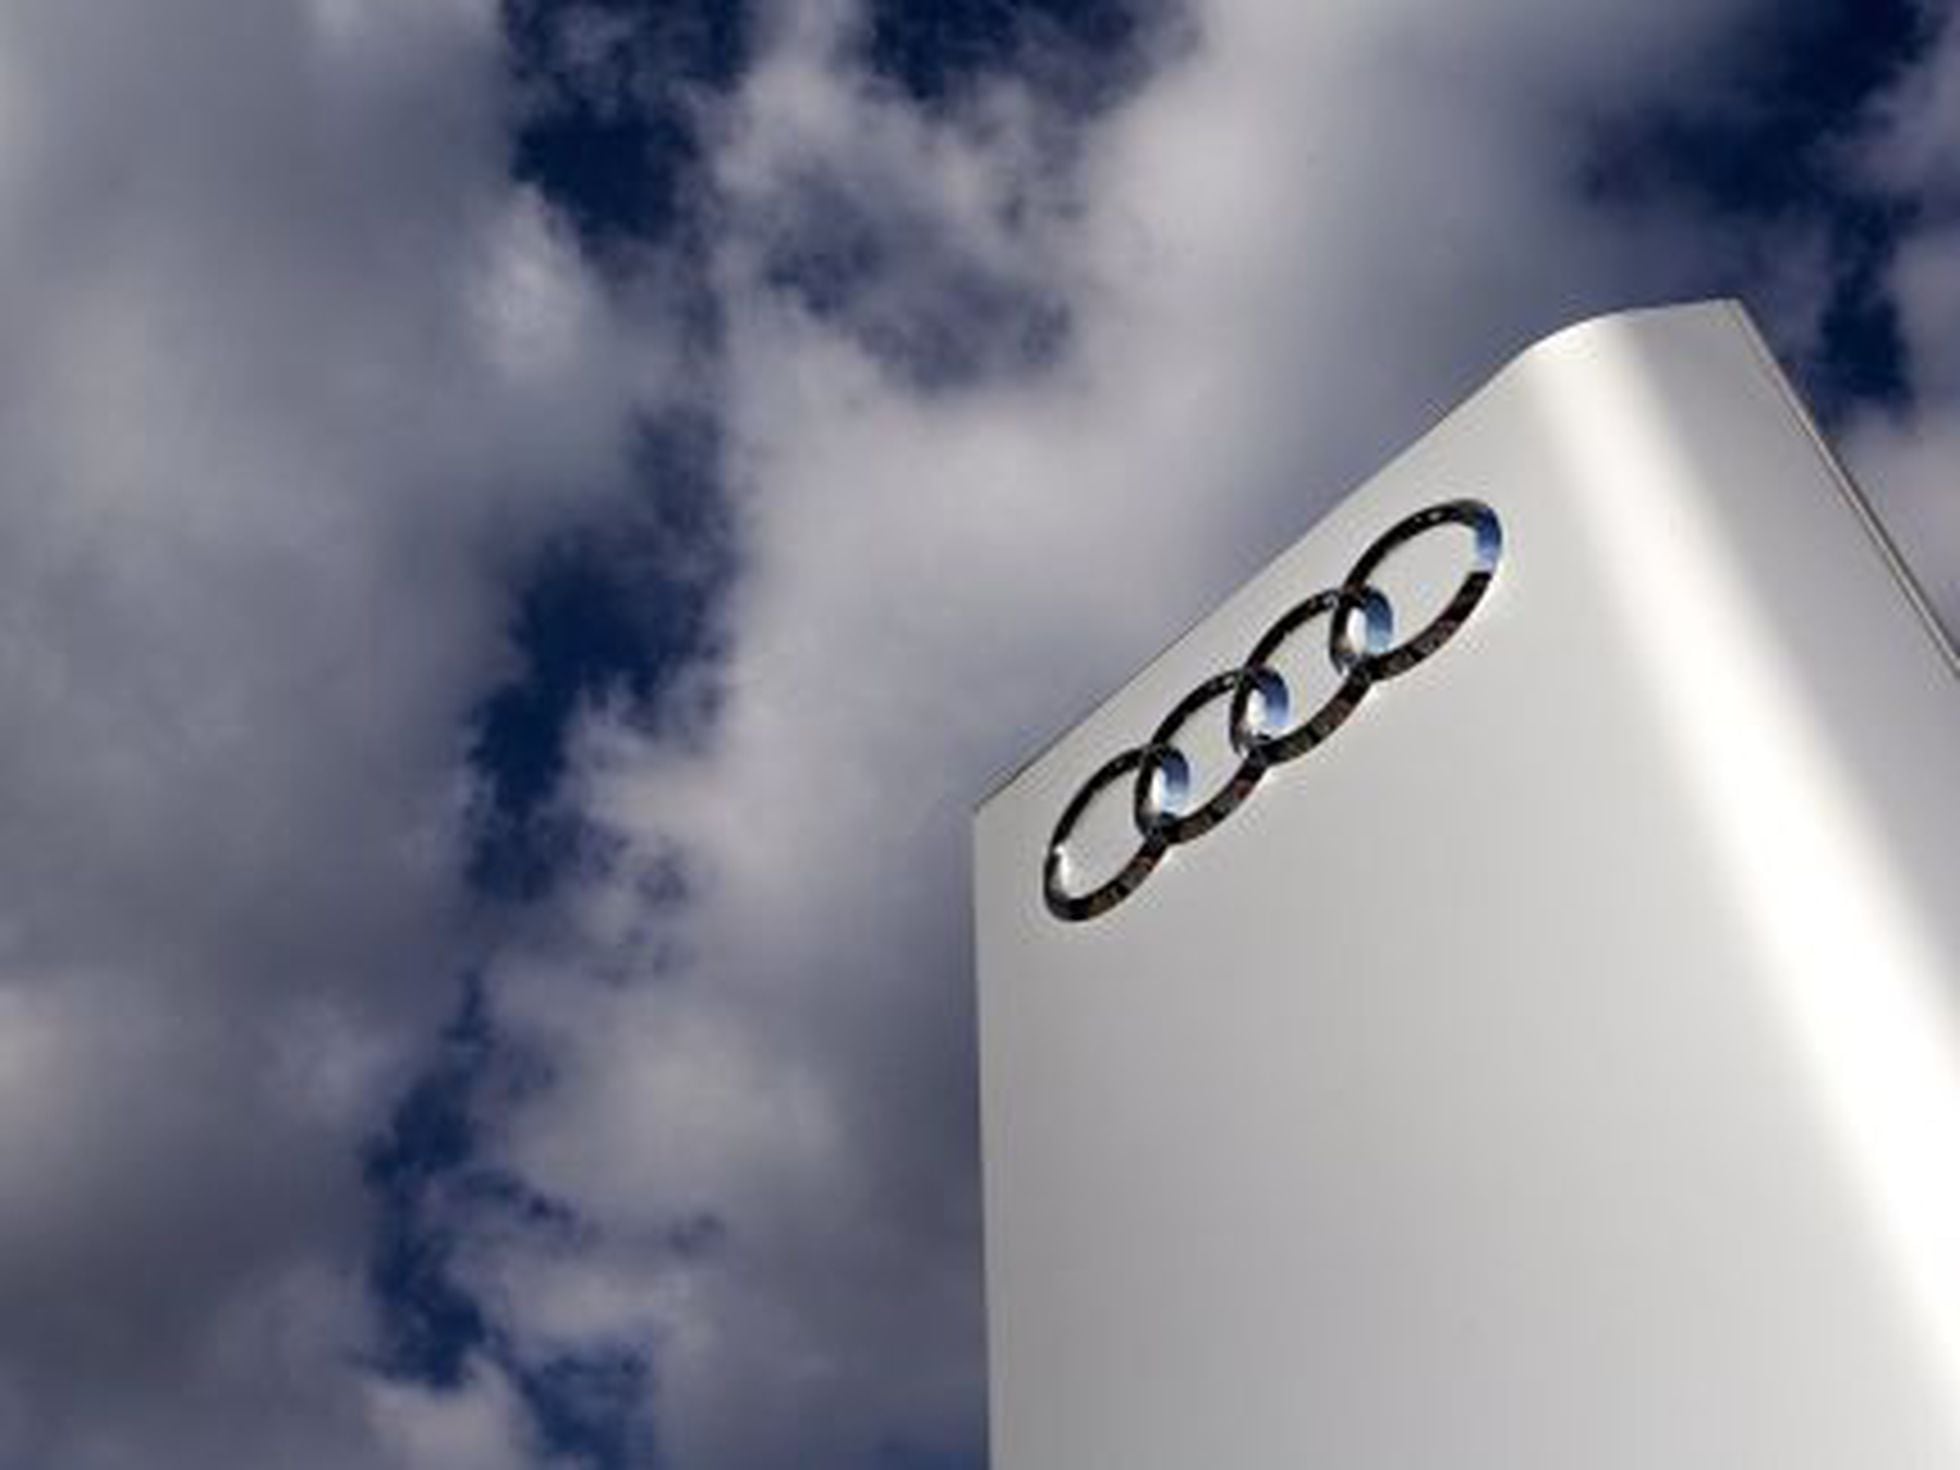 Audi Confirms 2.1 Million Cars Involved in Volkswagen Emissions